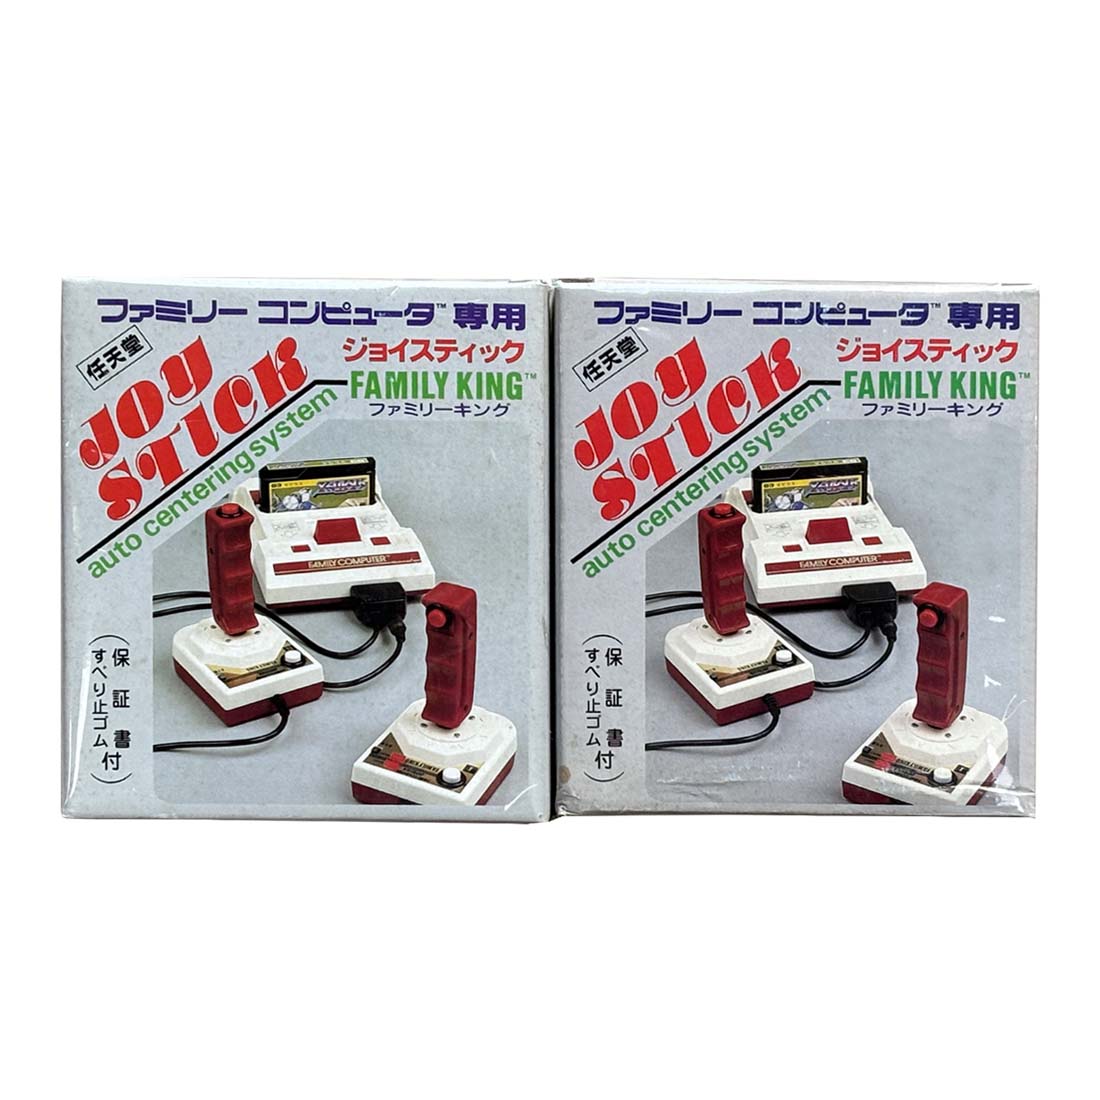 (Pre-Owned) Family Computer Joystick Family King - جهاز تحكم - Store 974 | ستور ٩٧٤